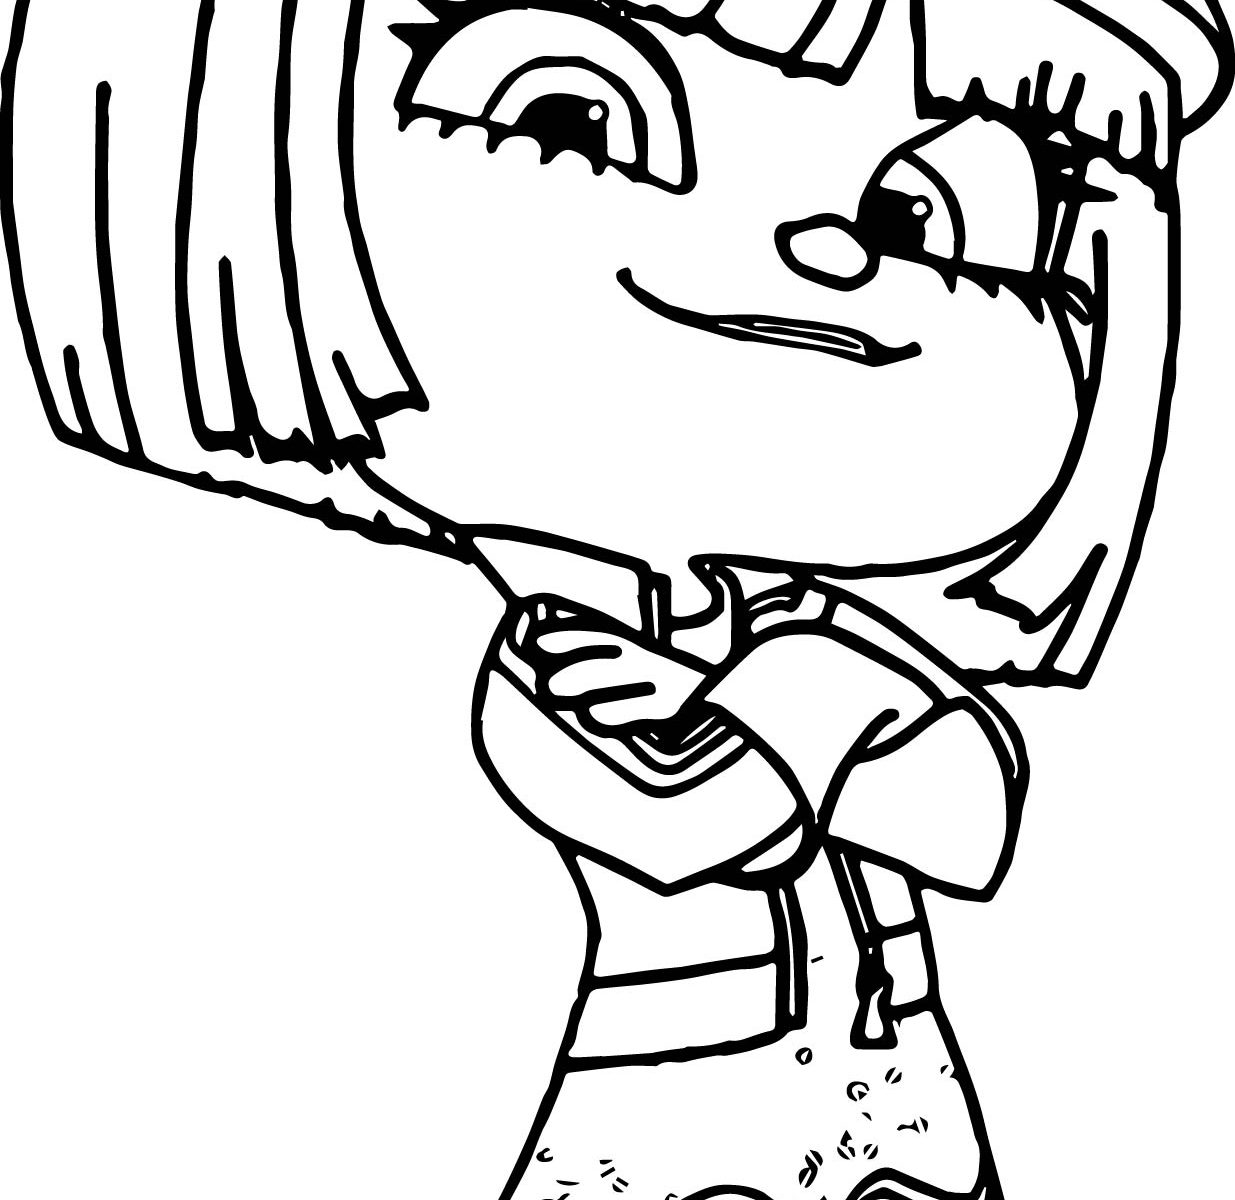 Vanellope Coloring Pages at GetColorings.com | Free printable colorings ...